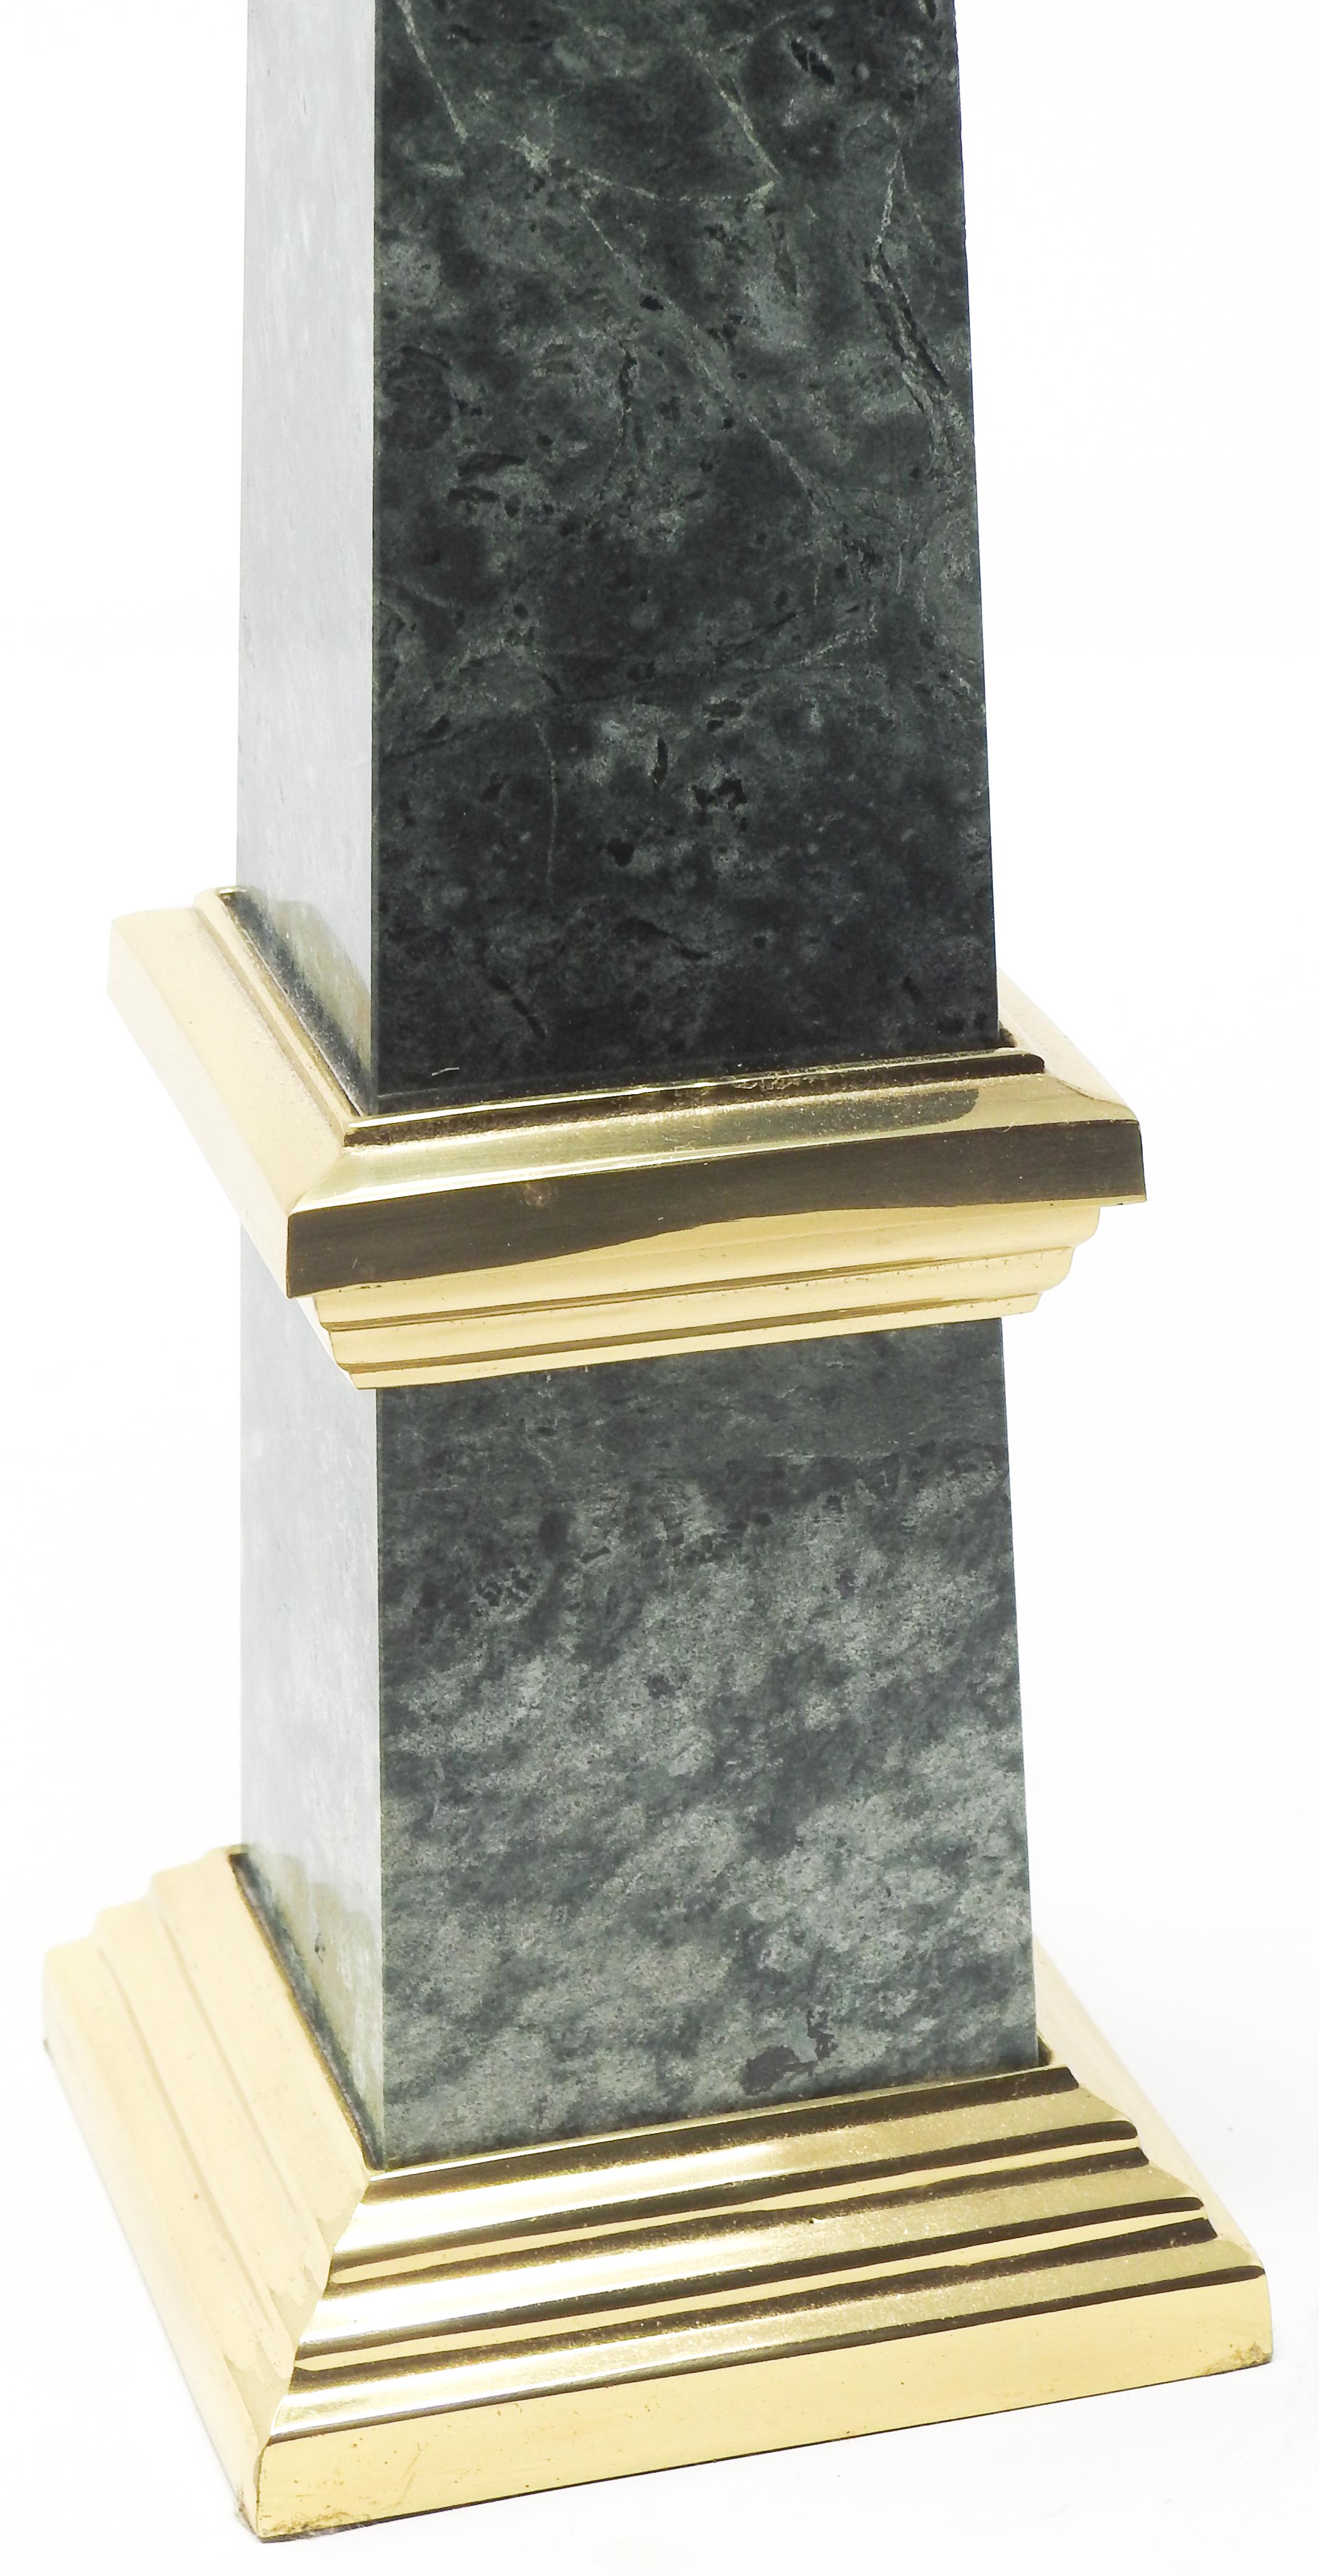 Offering this beautiful green marble obelisk. Starting on a brass base it rises to meet a platform that is also done in brass and then tops out with the green veined marble.